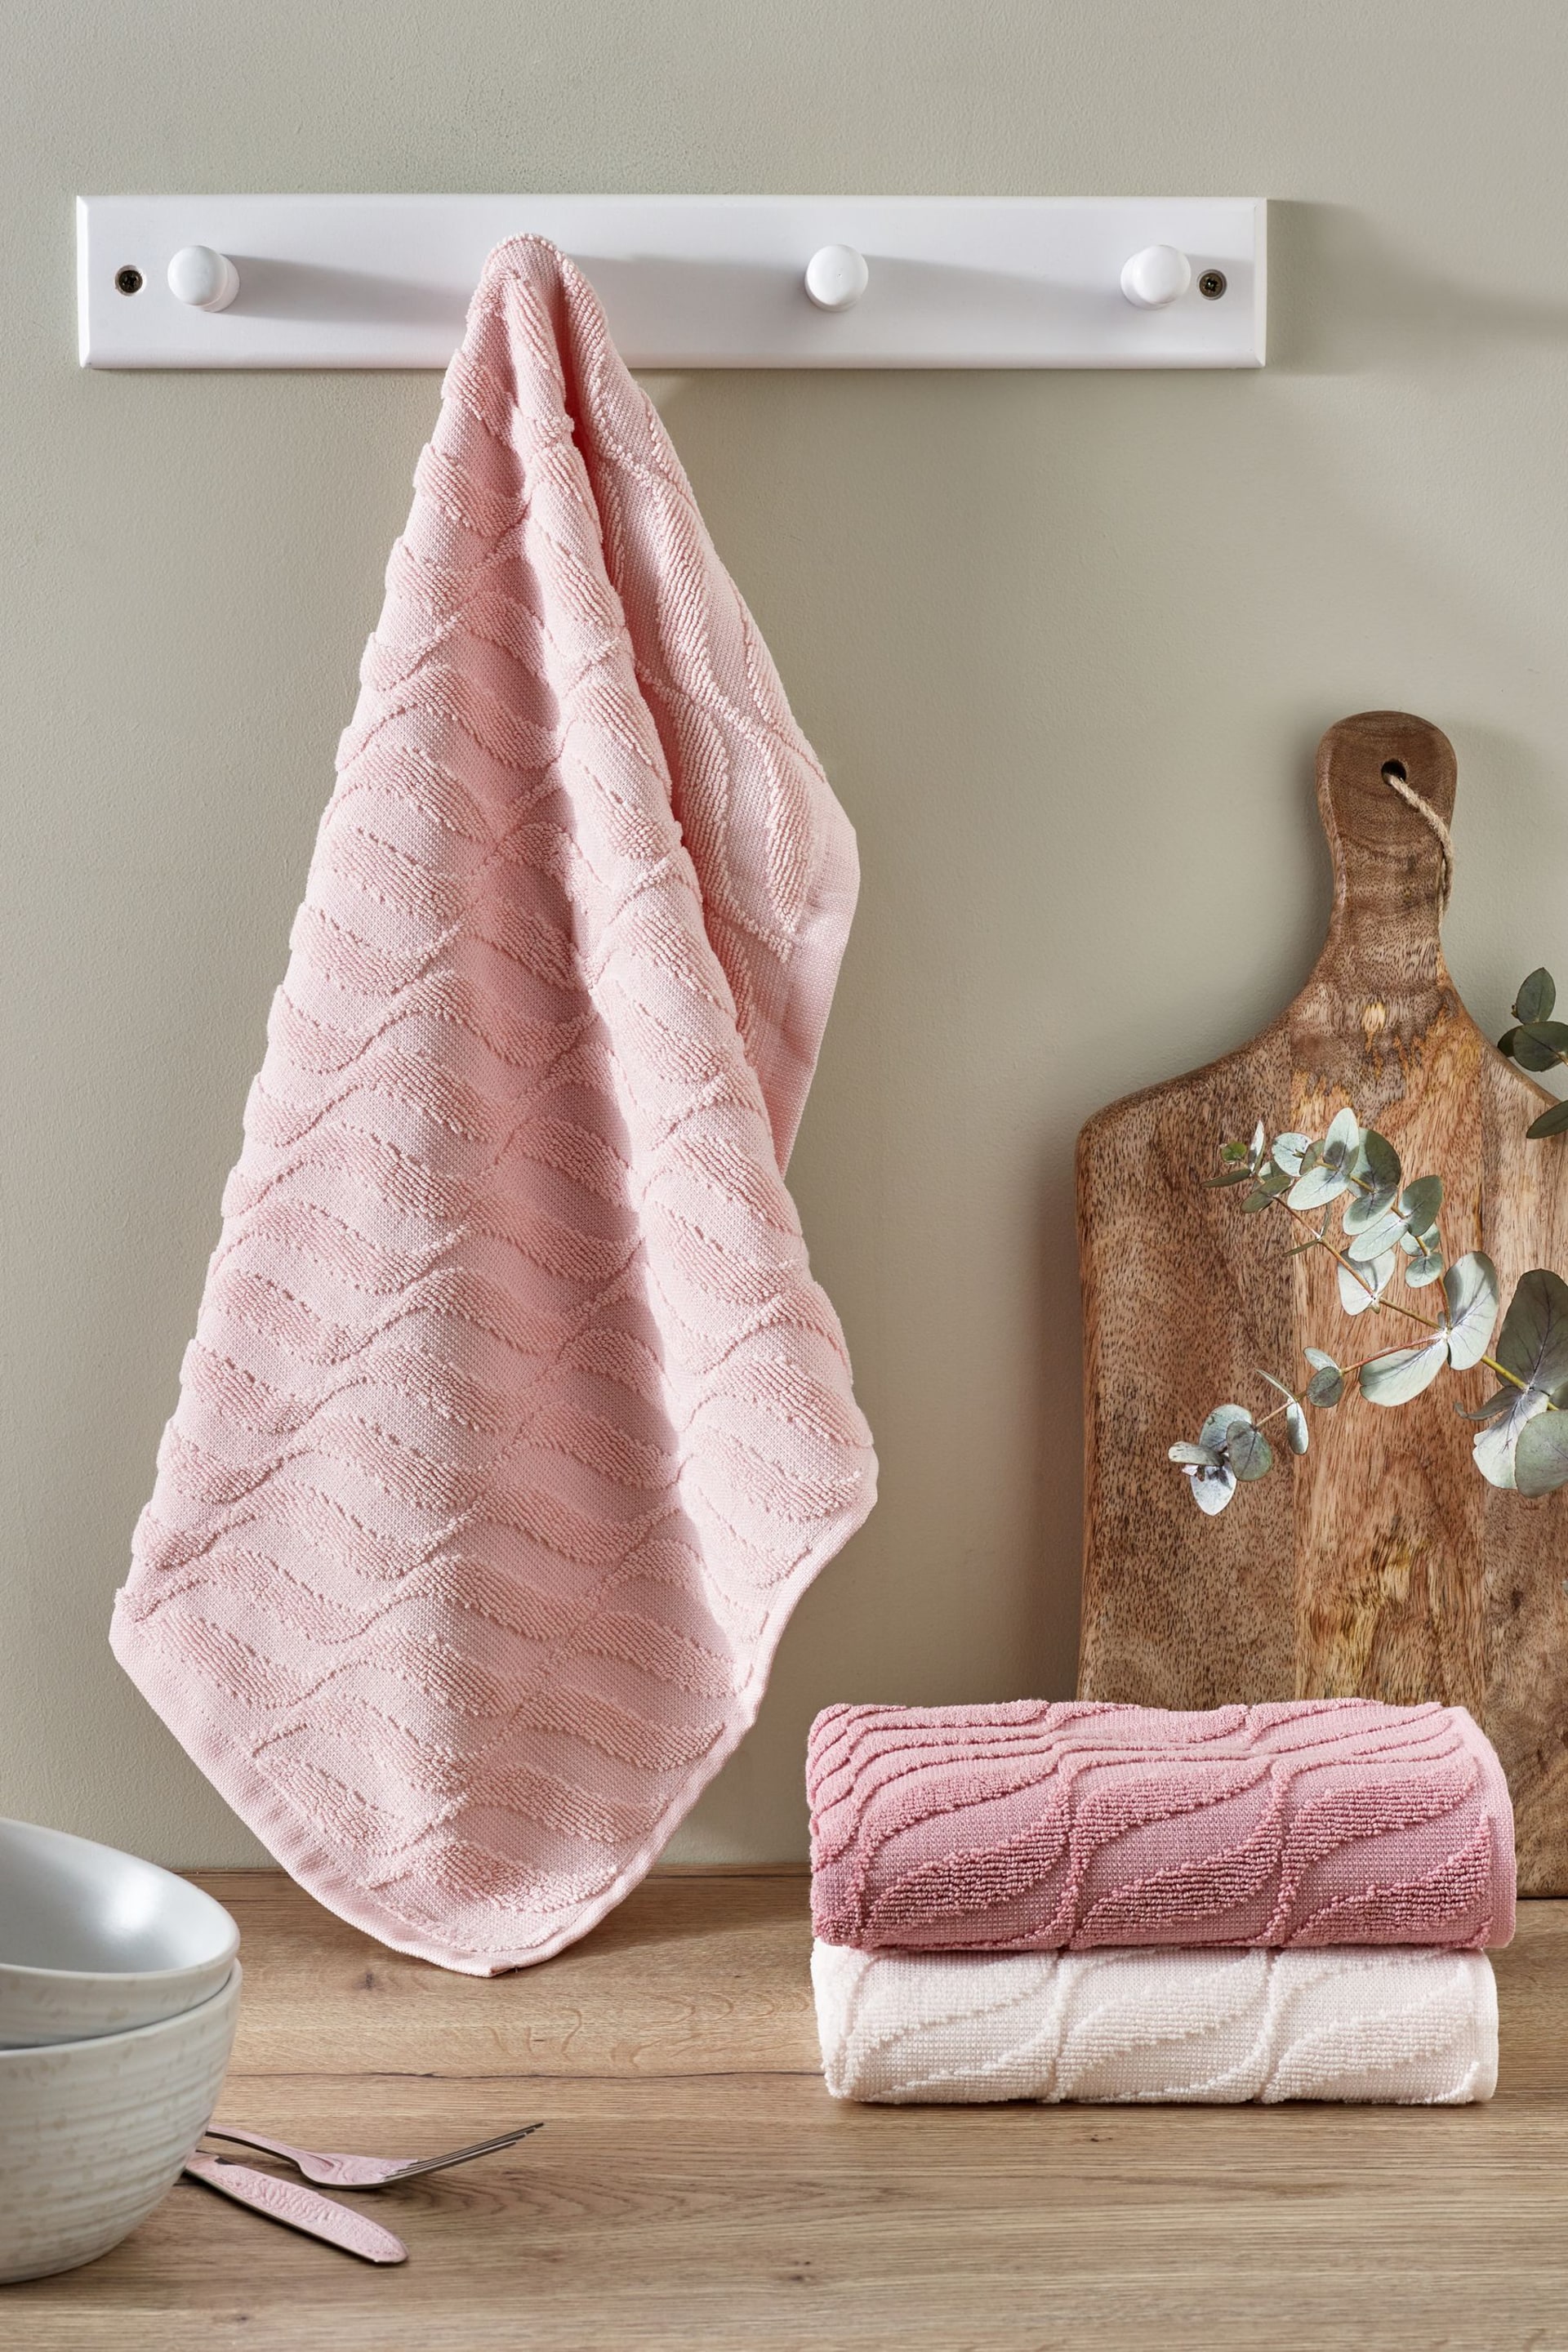 Set of 3 Pink Terry Tea Towels - Image 1 of 4